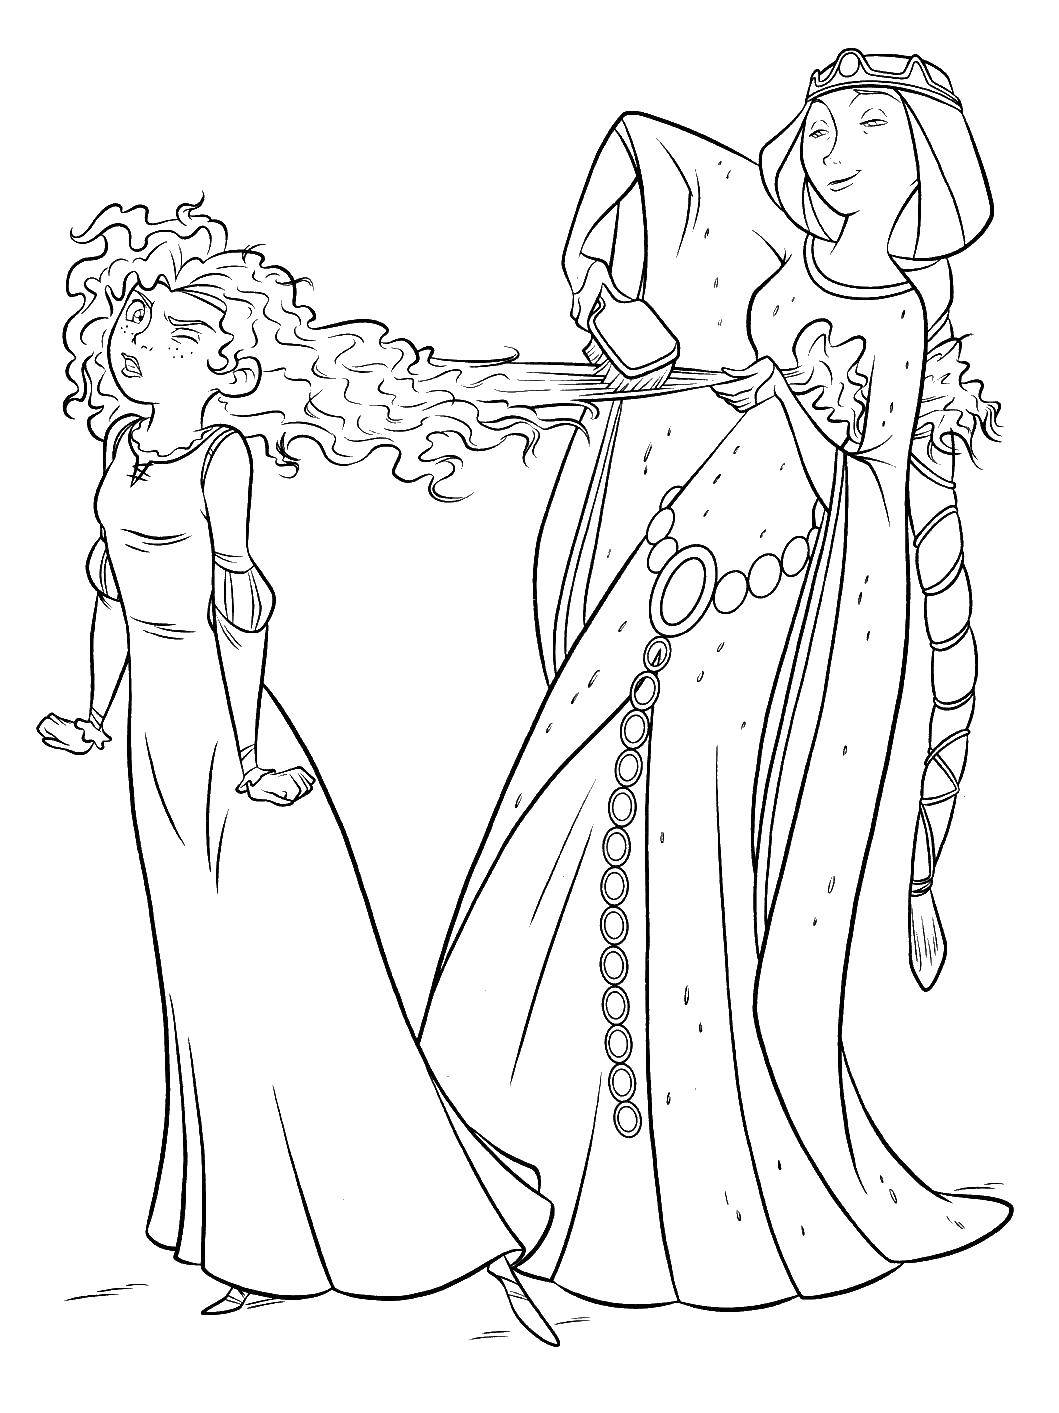 Coloring Queen Elinor and Merida. Category brave heart. Tags:  mother, daughter, hairbrush, hair.